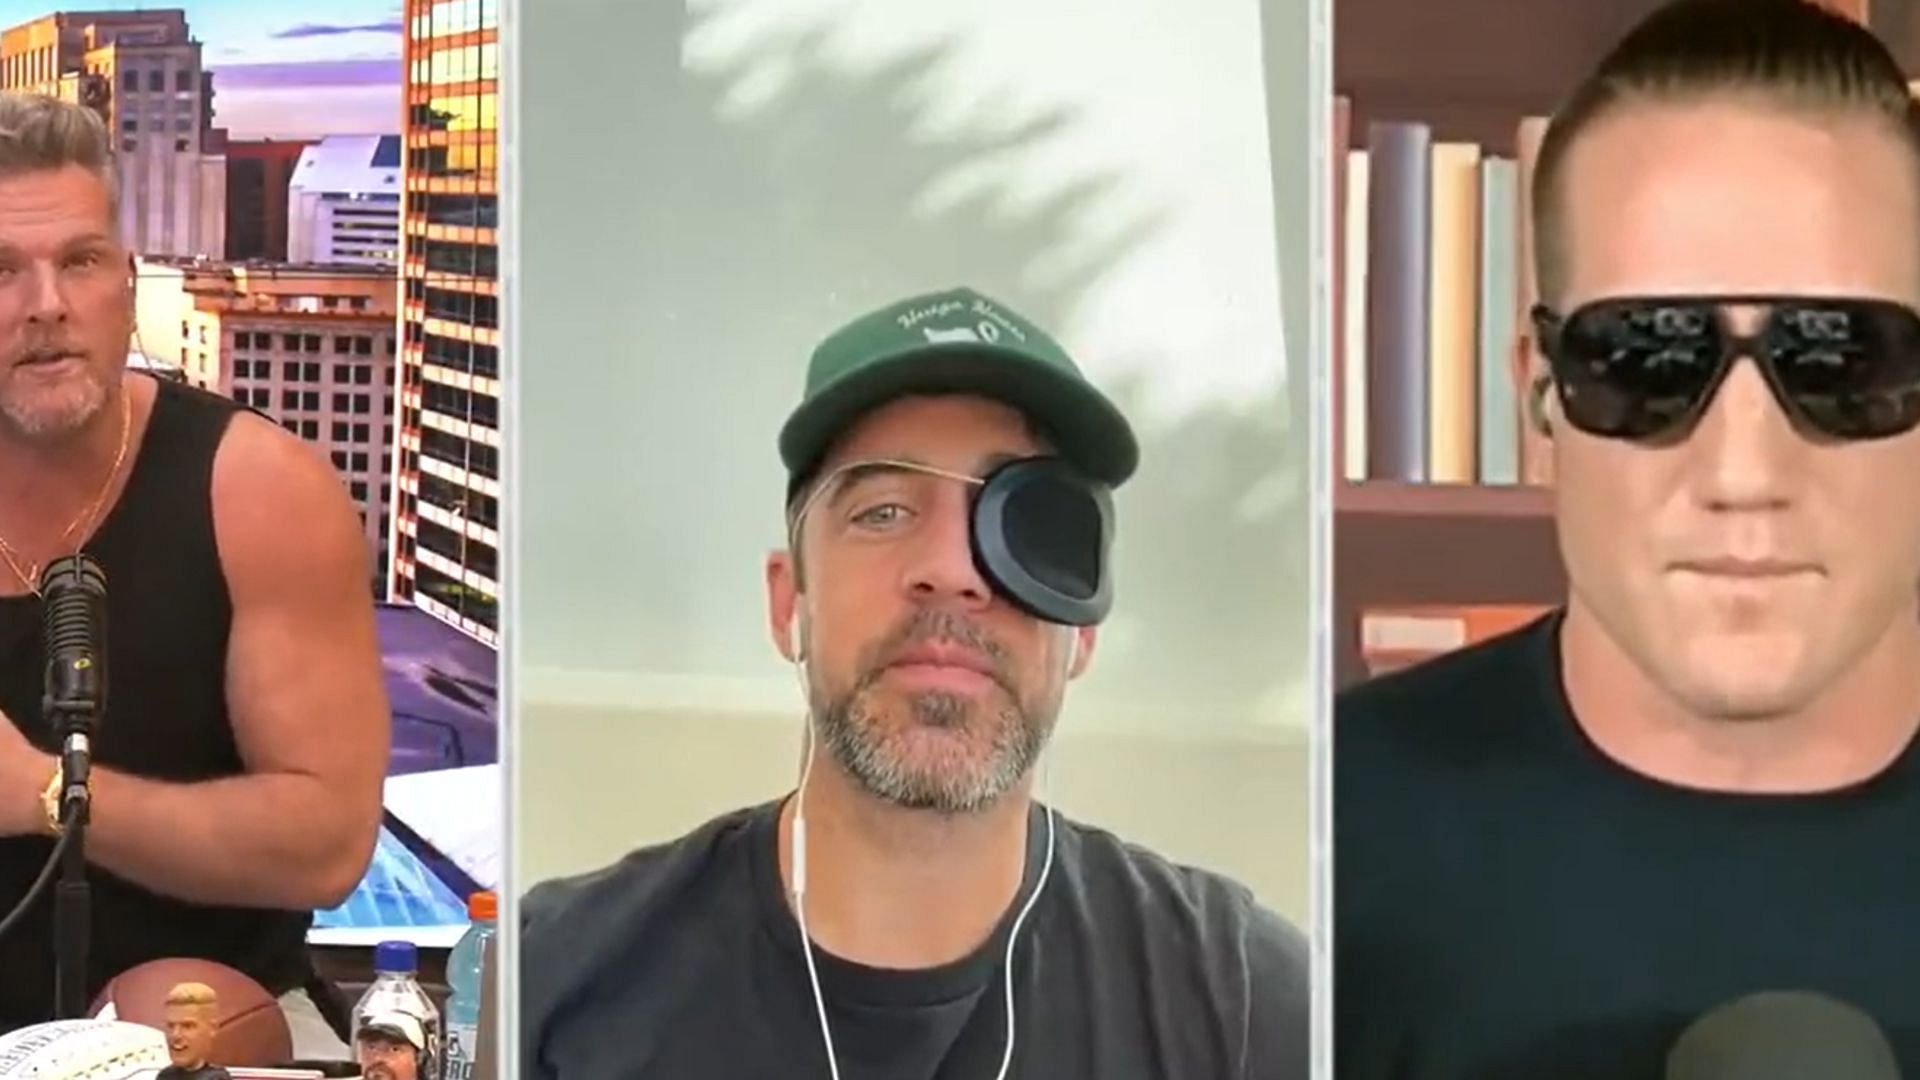 Aaron Rodgers was sporting an eye patch.